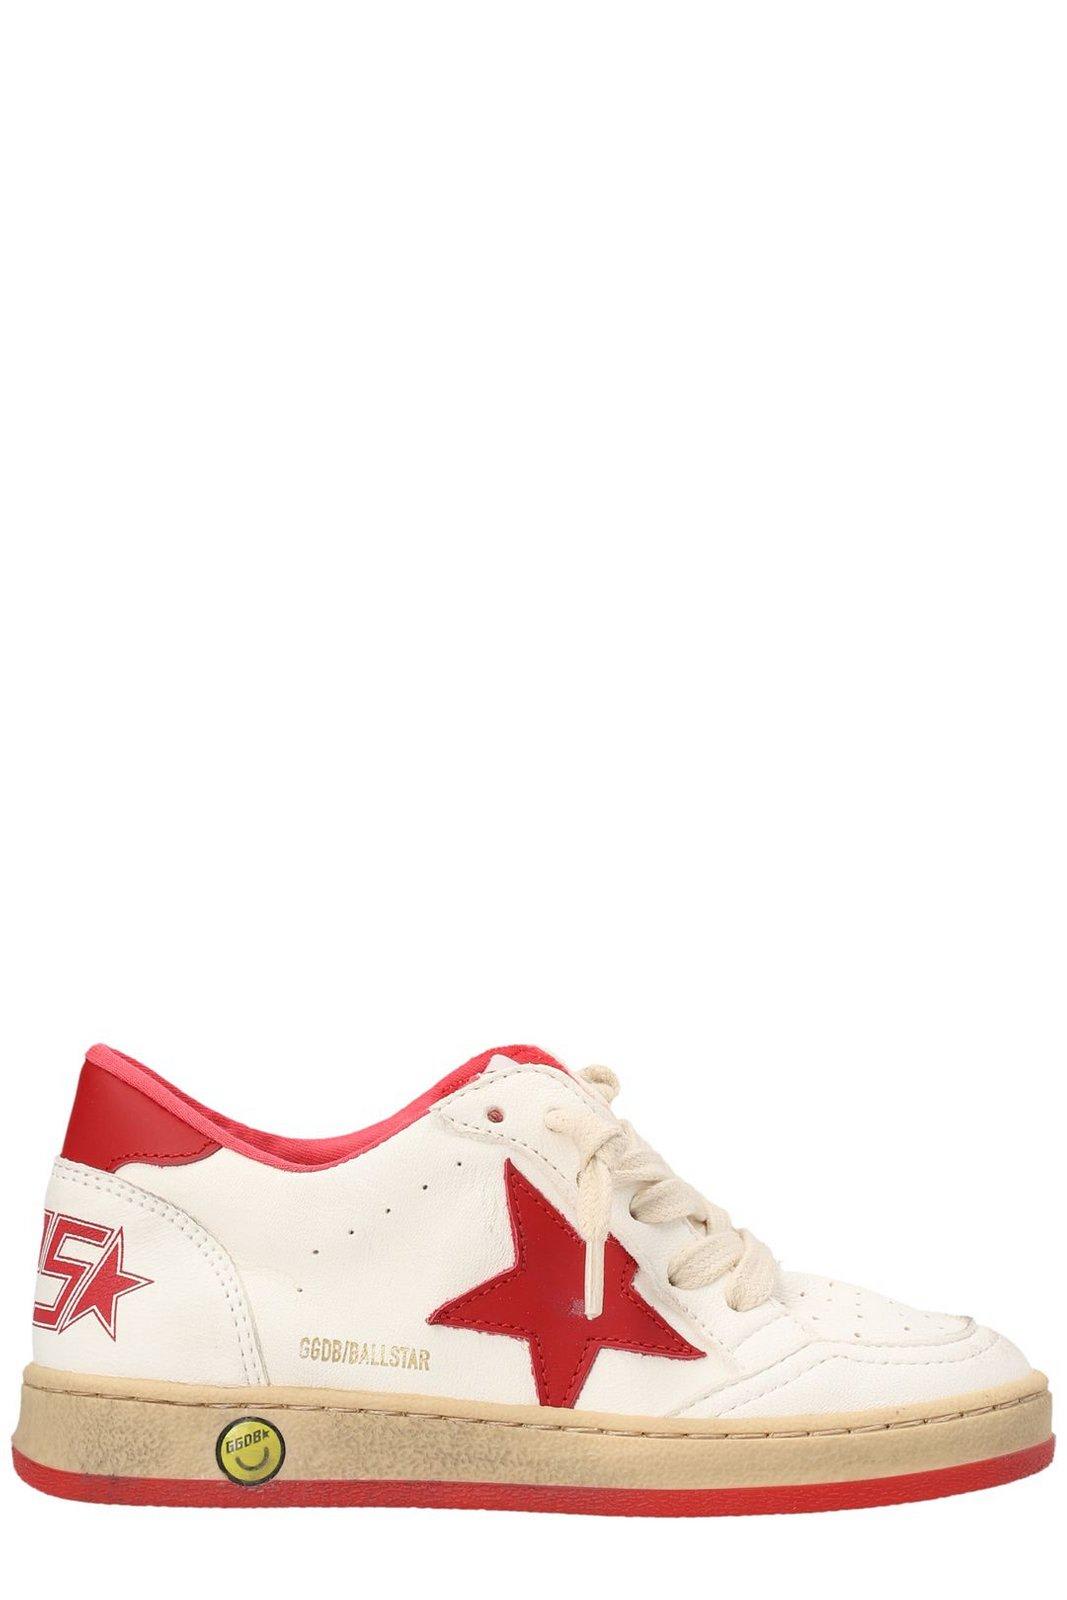 Golden Goose Ball Star Lace-up Sneakers